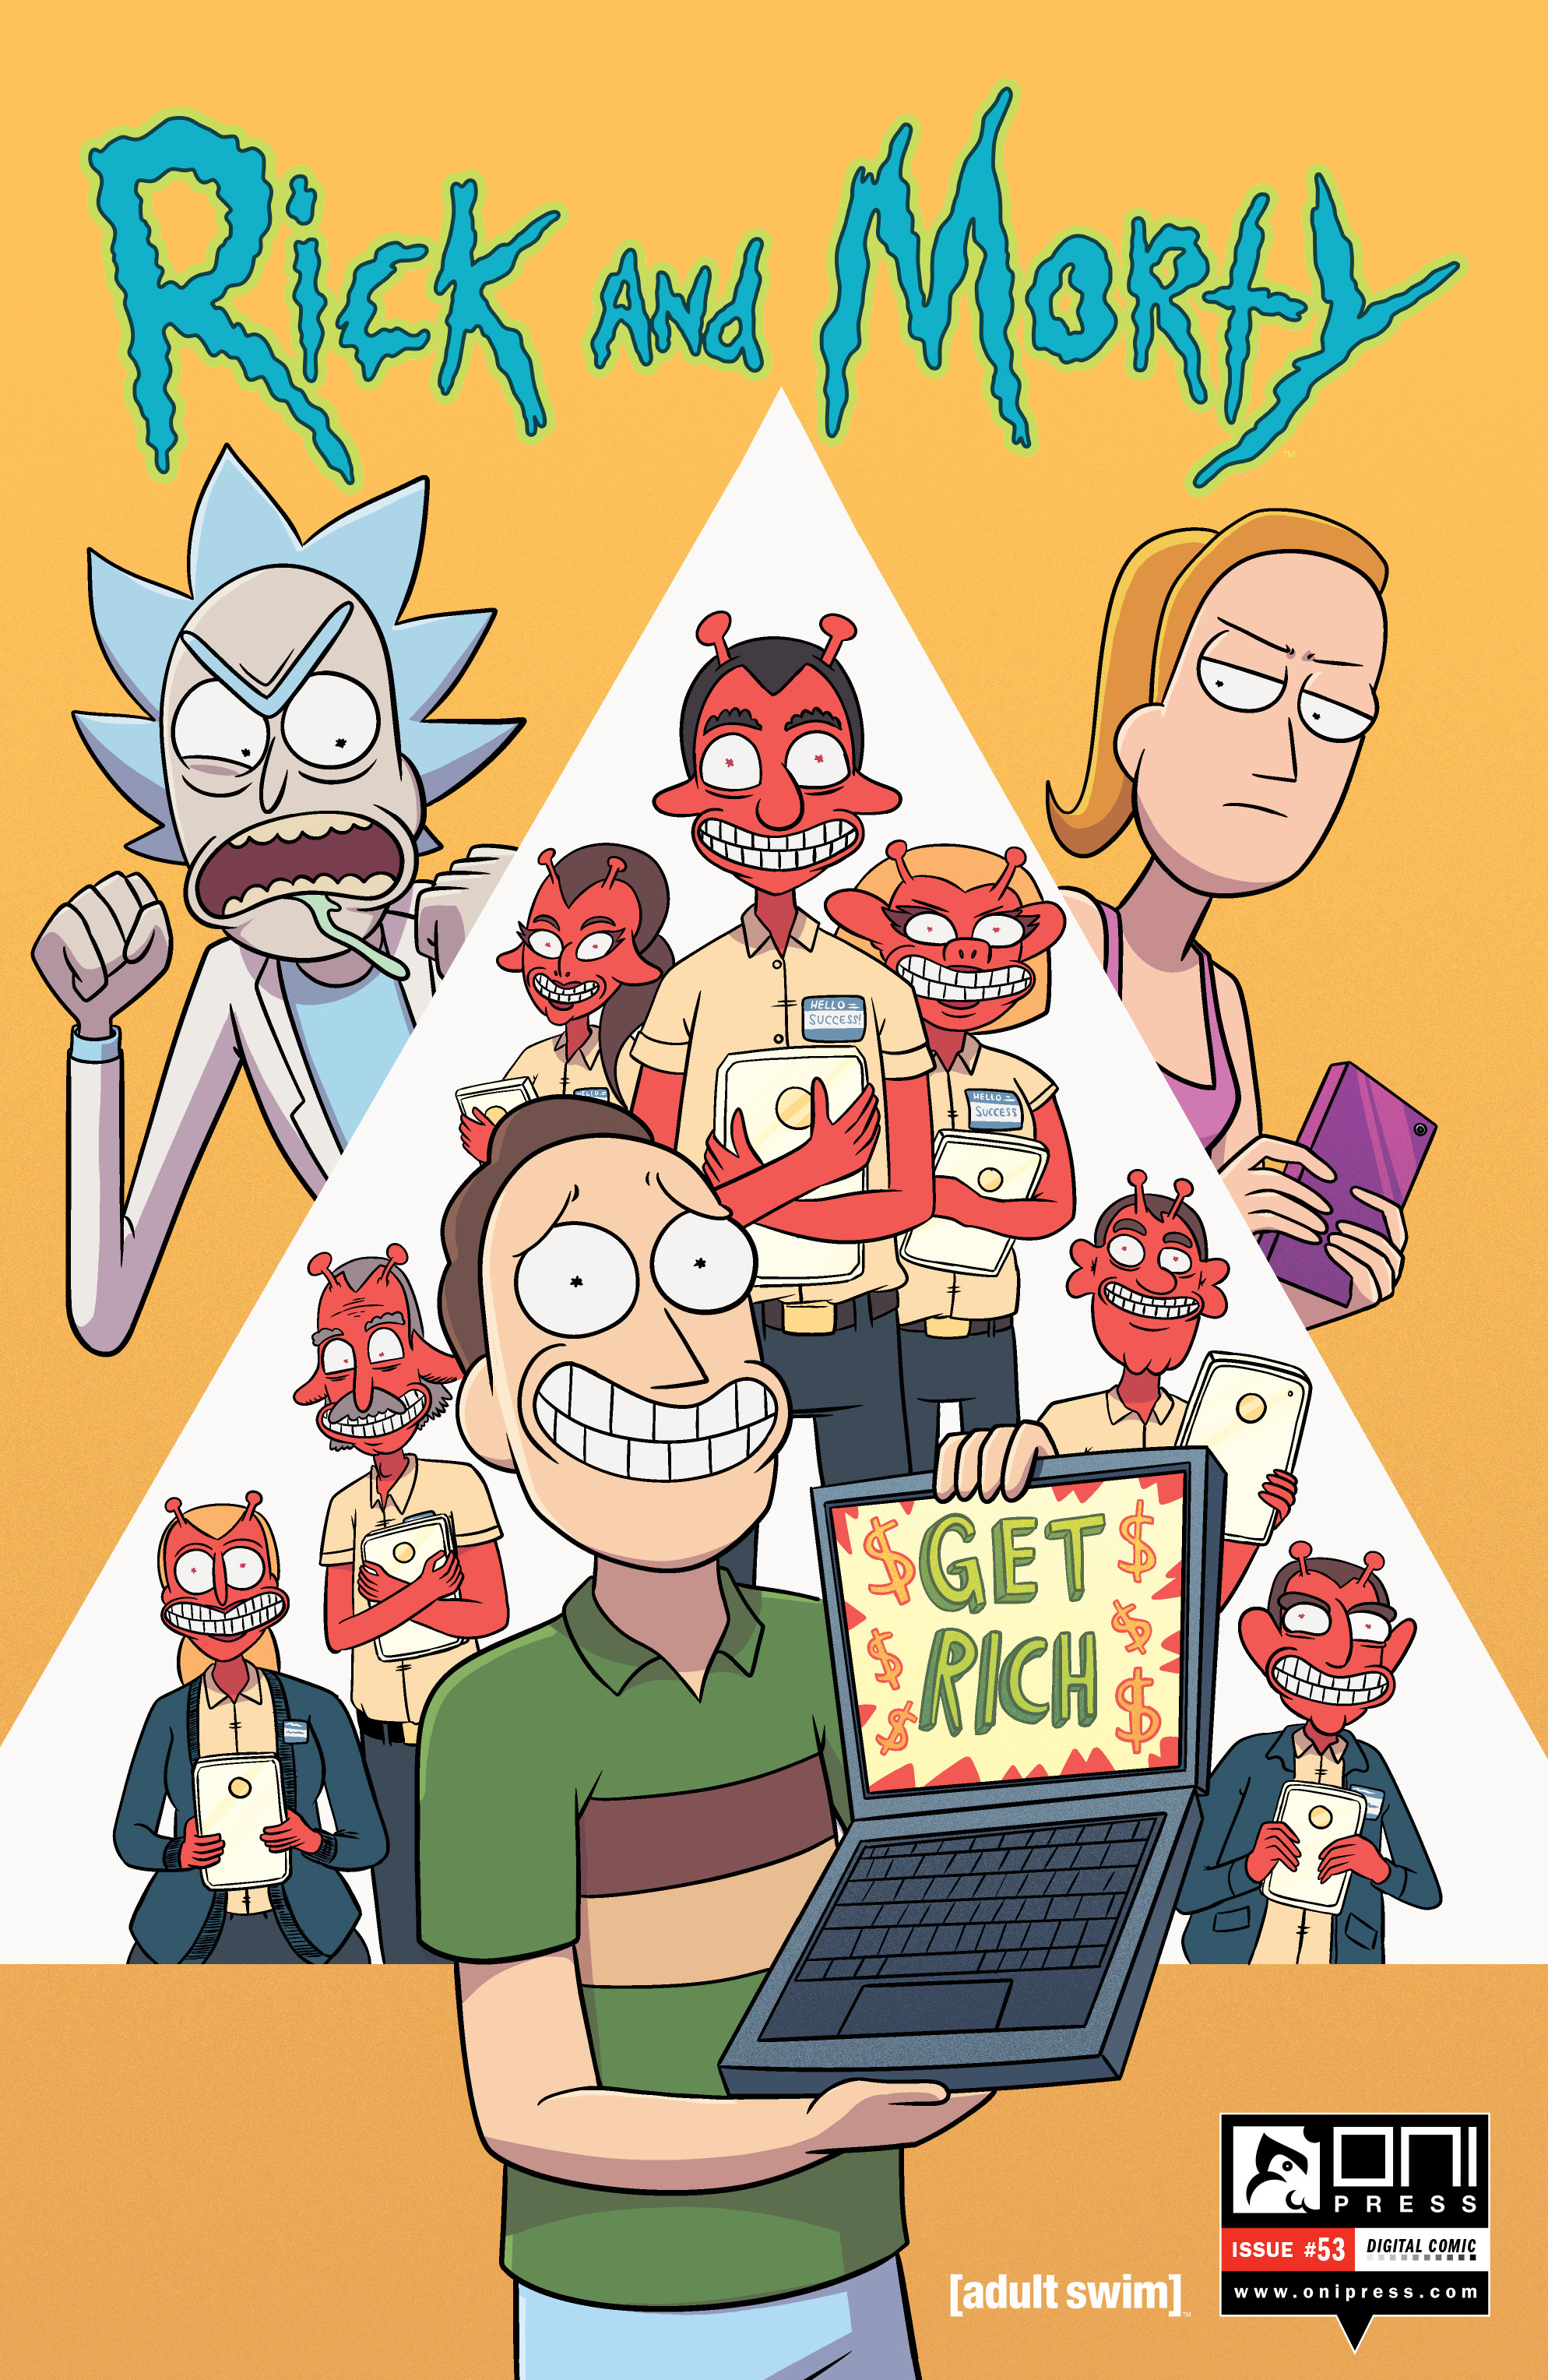 Read online Rick and Morty comic -  Issue #53 - 1